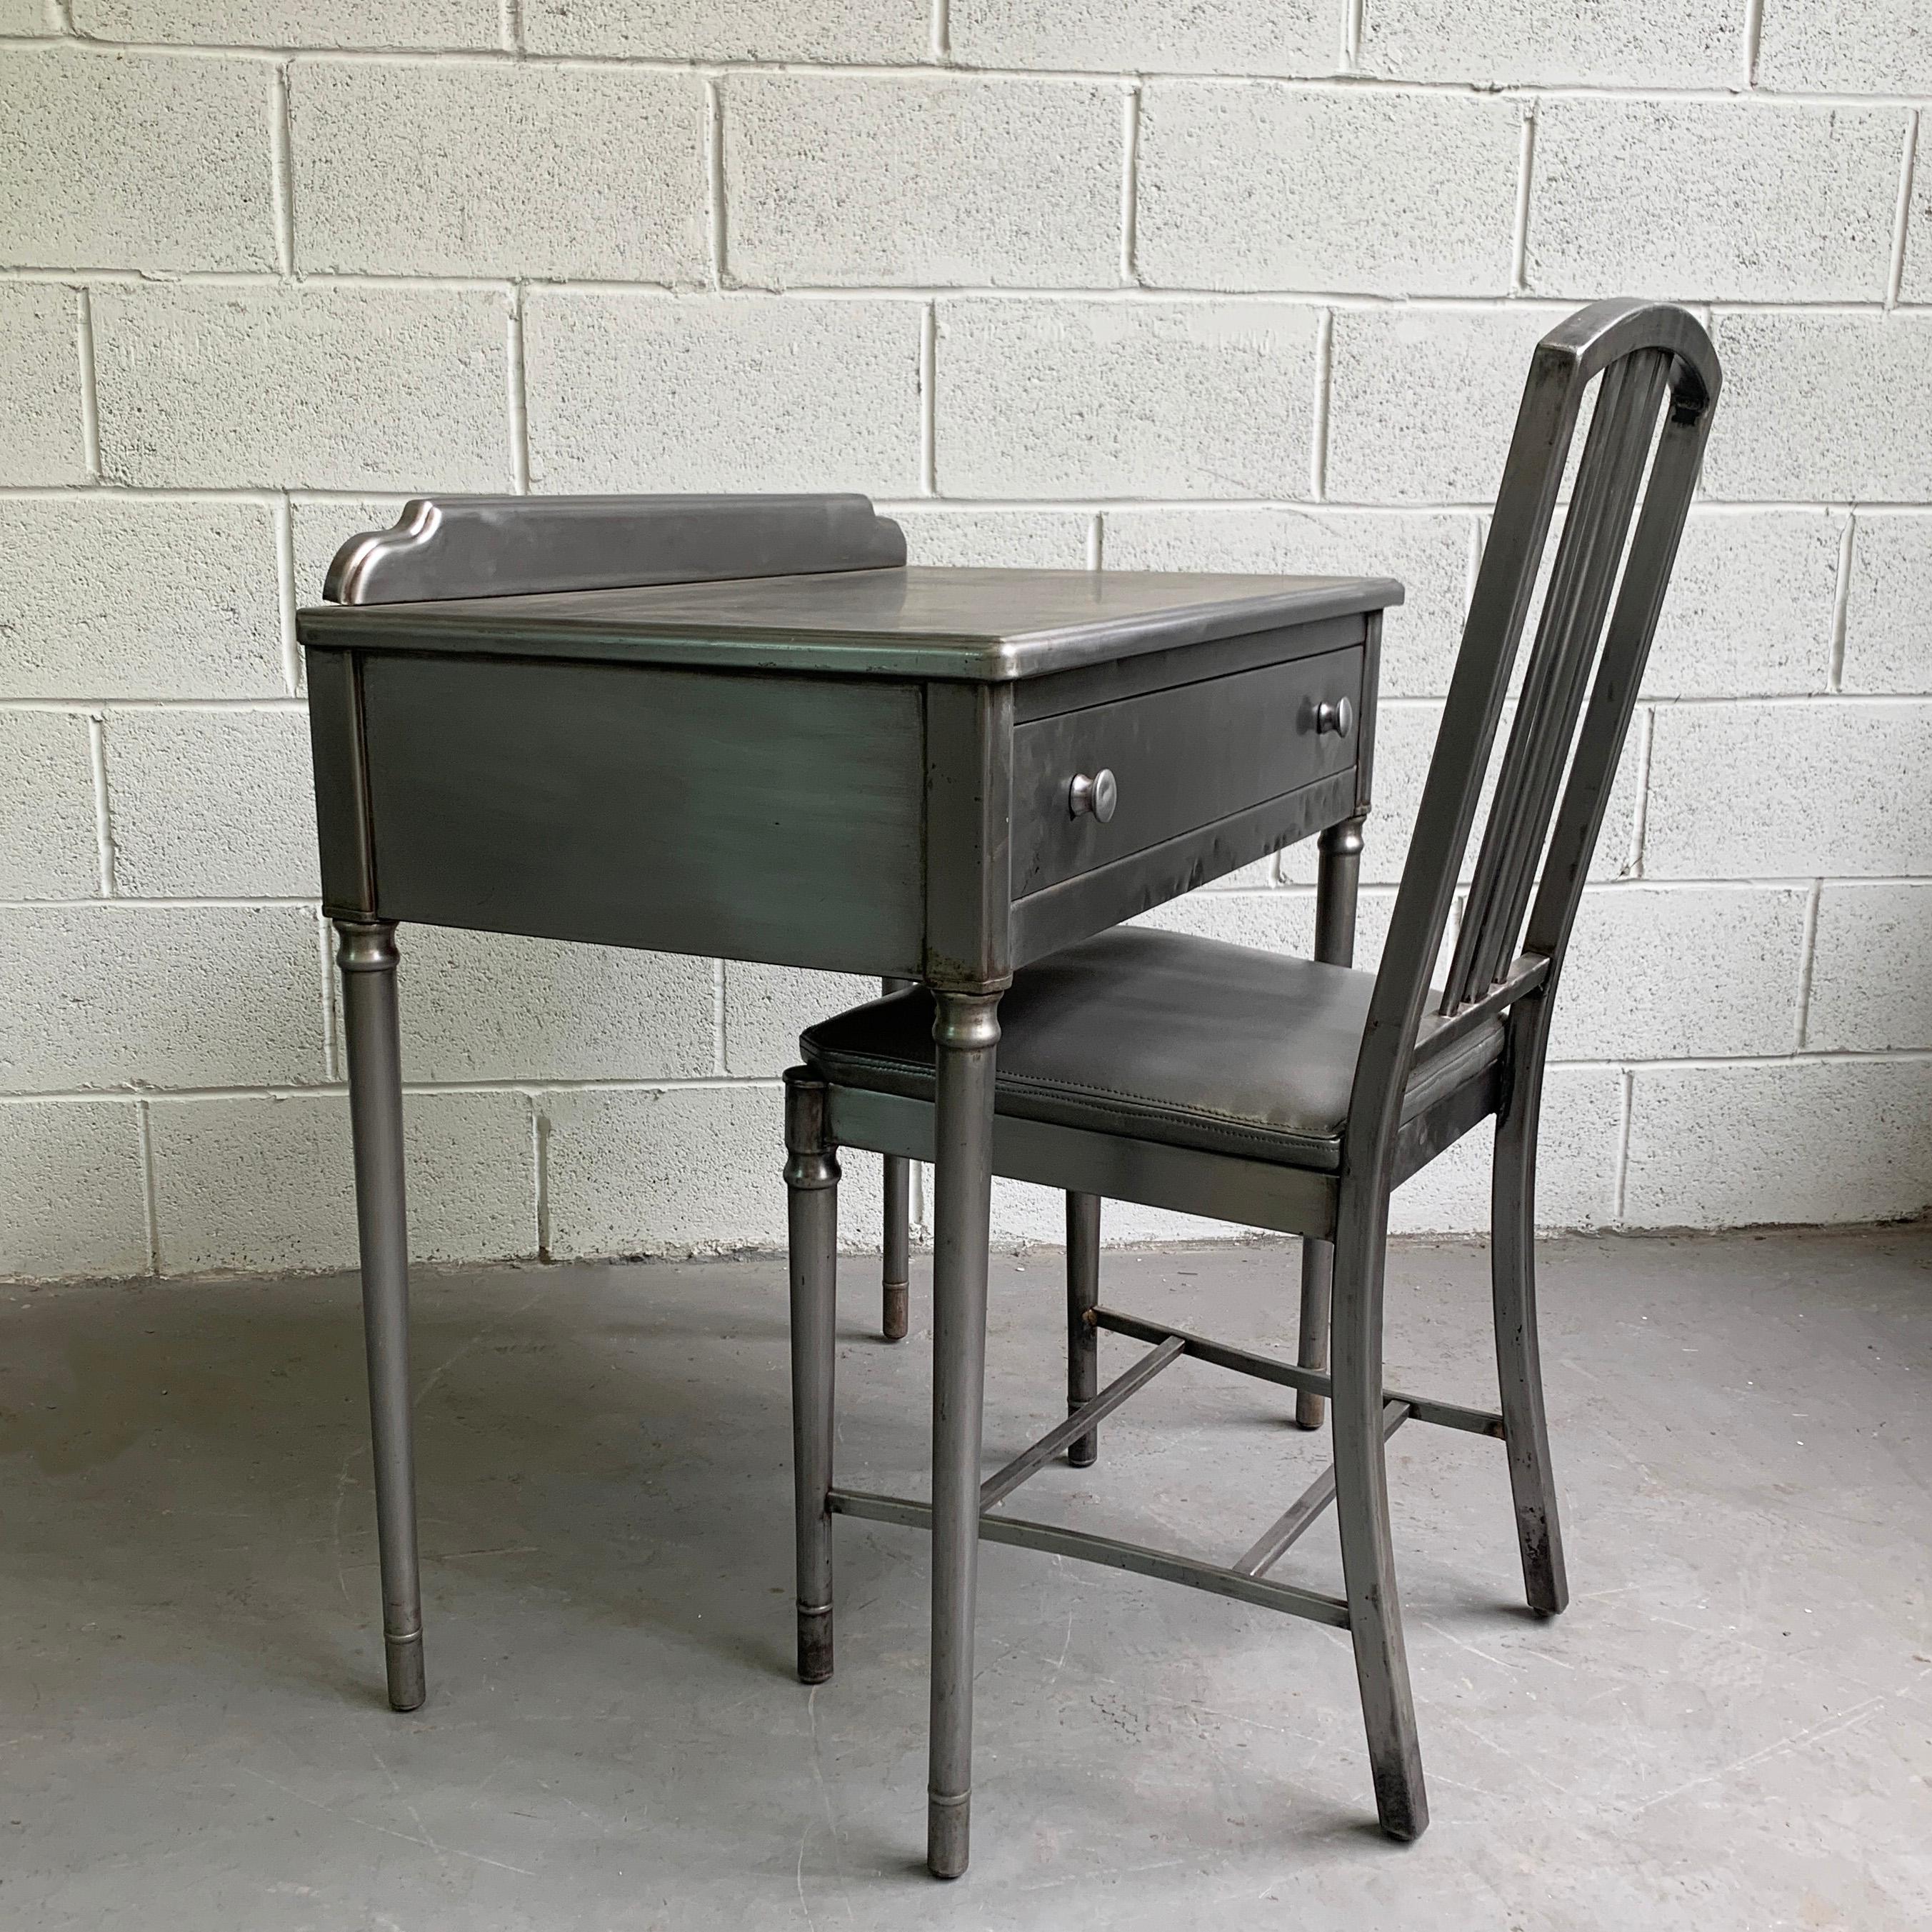 Early 20th century, Sheraton Series vanity or desk set by Simmons Company Furniture features an upholstered gray vinyl chair seat with gray drawer interior. Leg room height is 22.5 inches and the lip on the back of the desk is 2.5 inches height. The